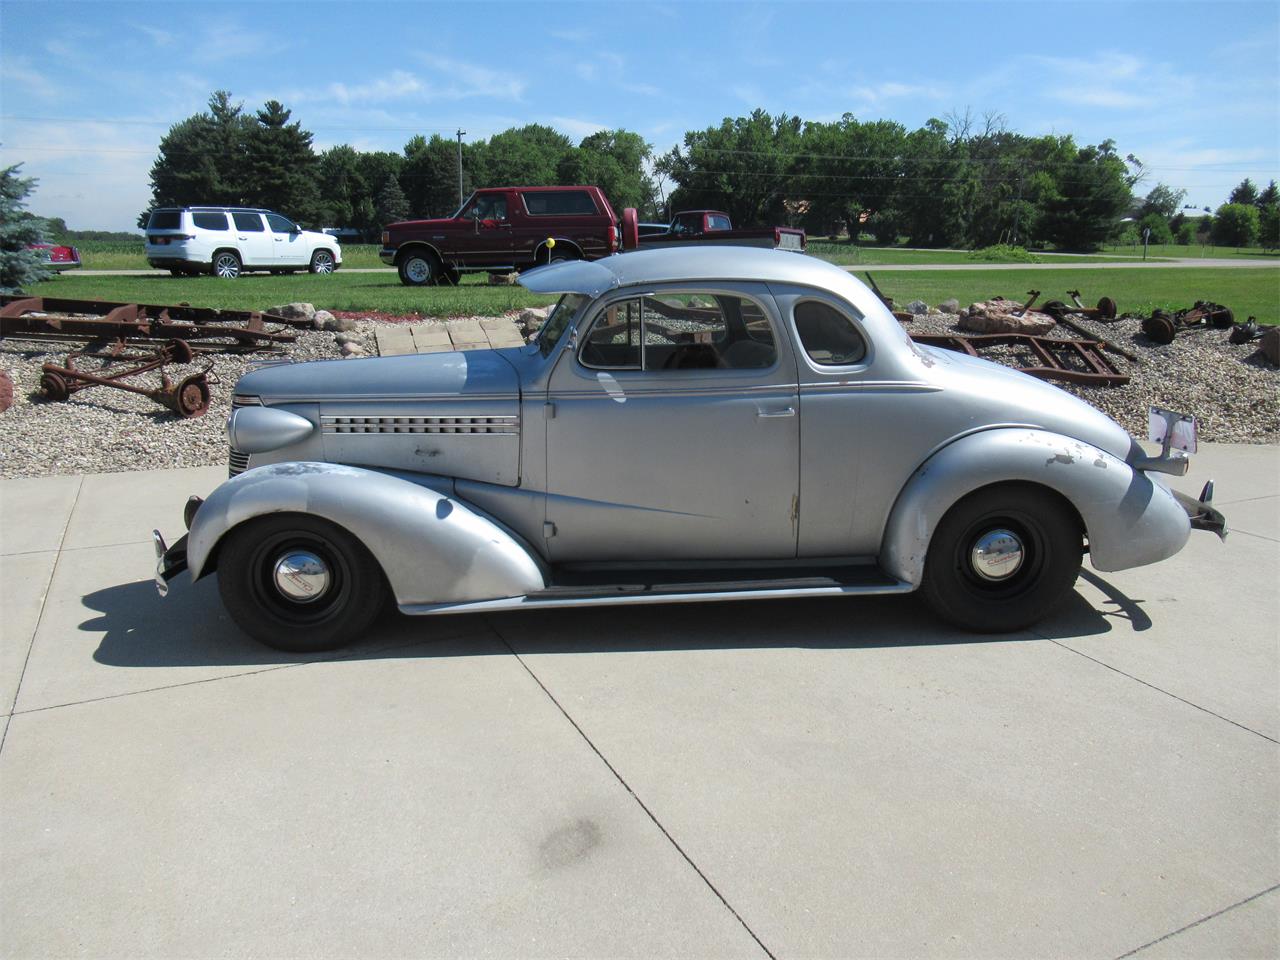 For Sale: 1938 Chevrolet Coupe in STOUGHTON, Wisconsin for sale in Stoughton, WI